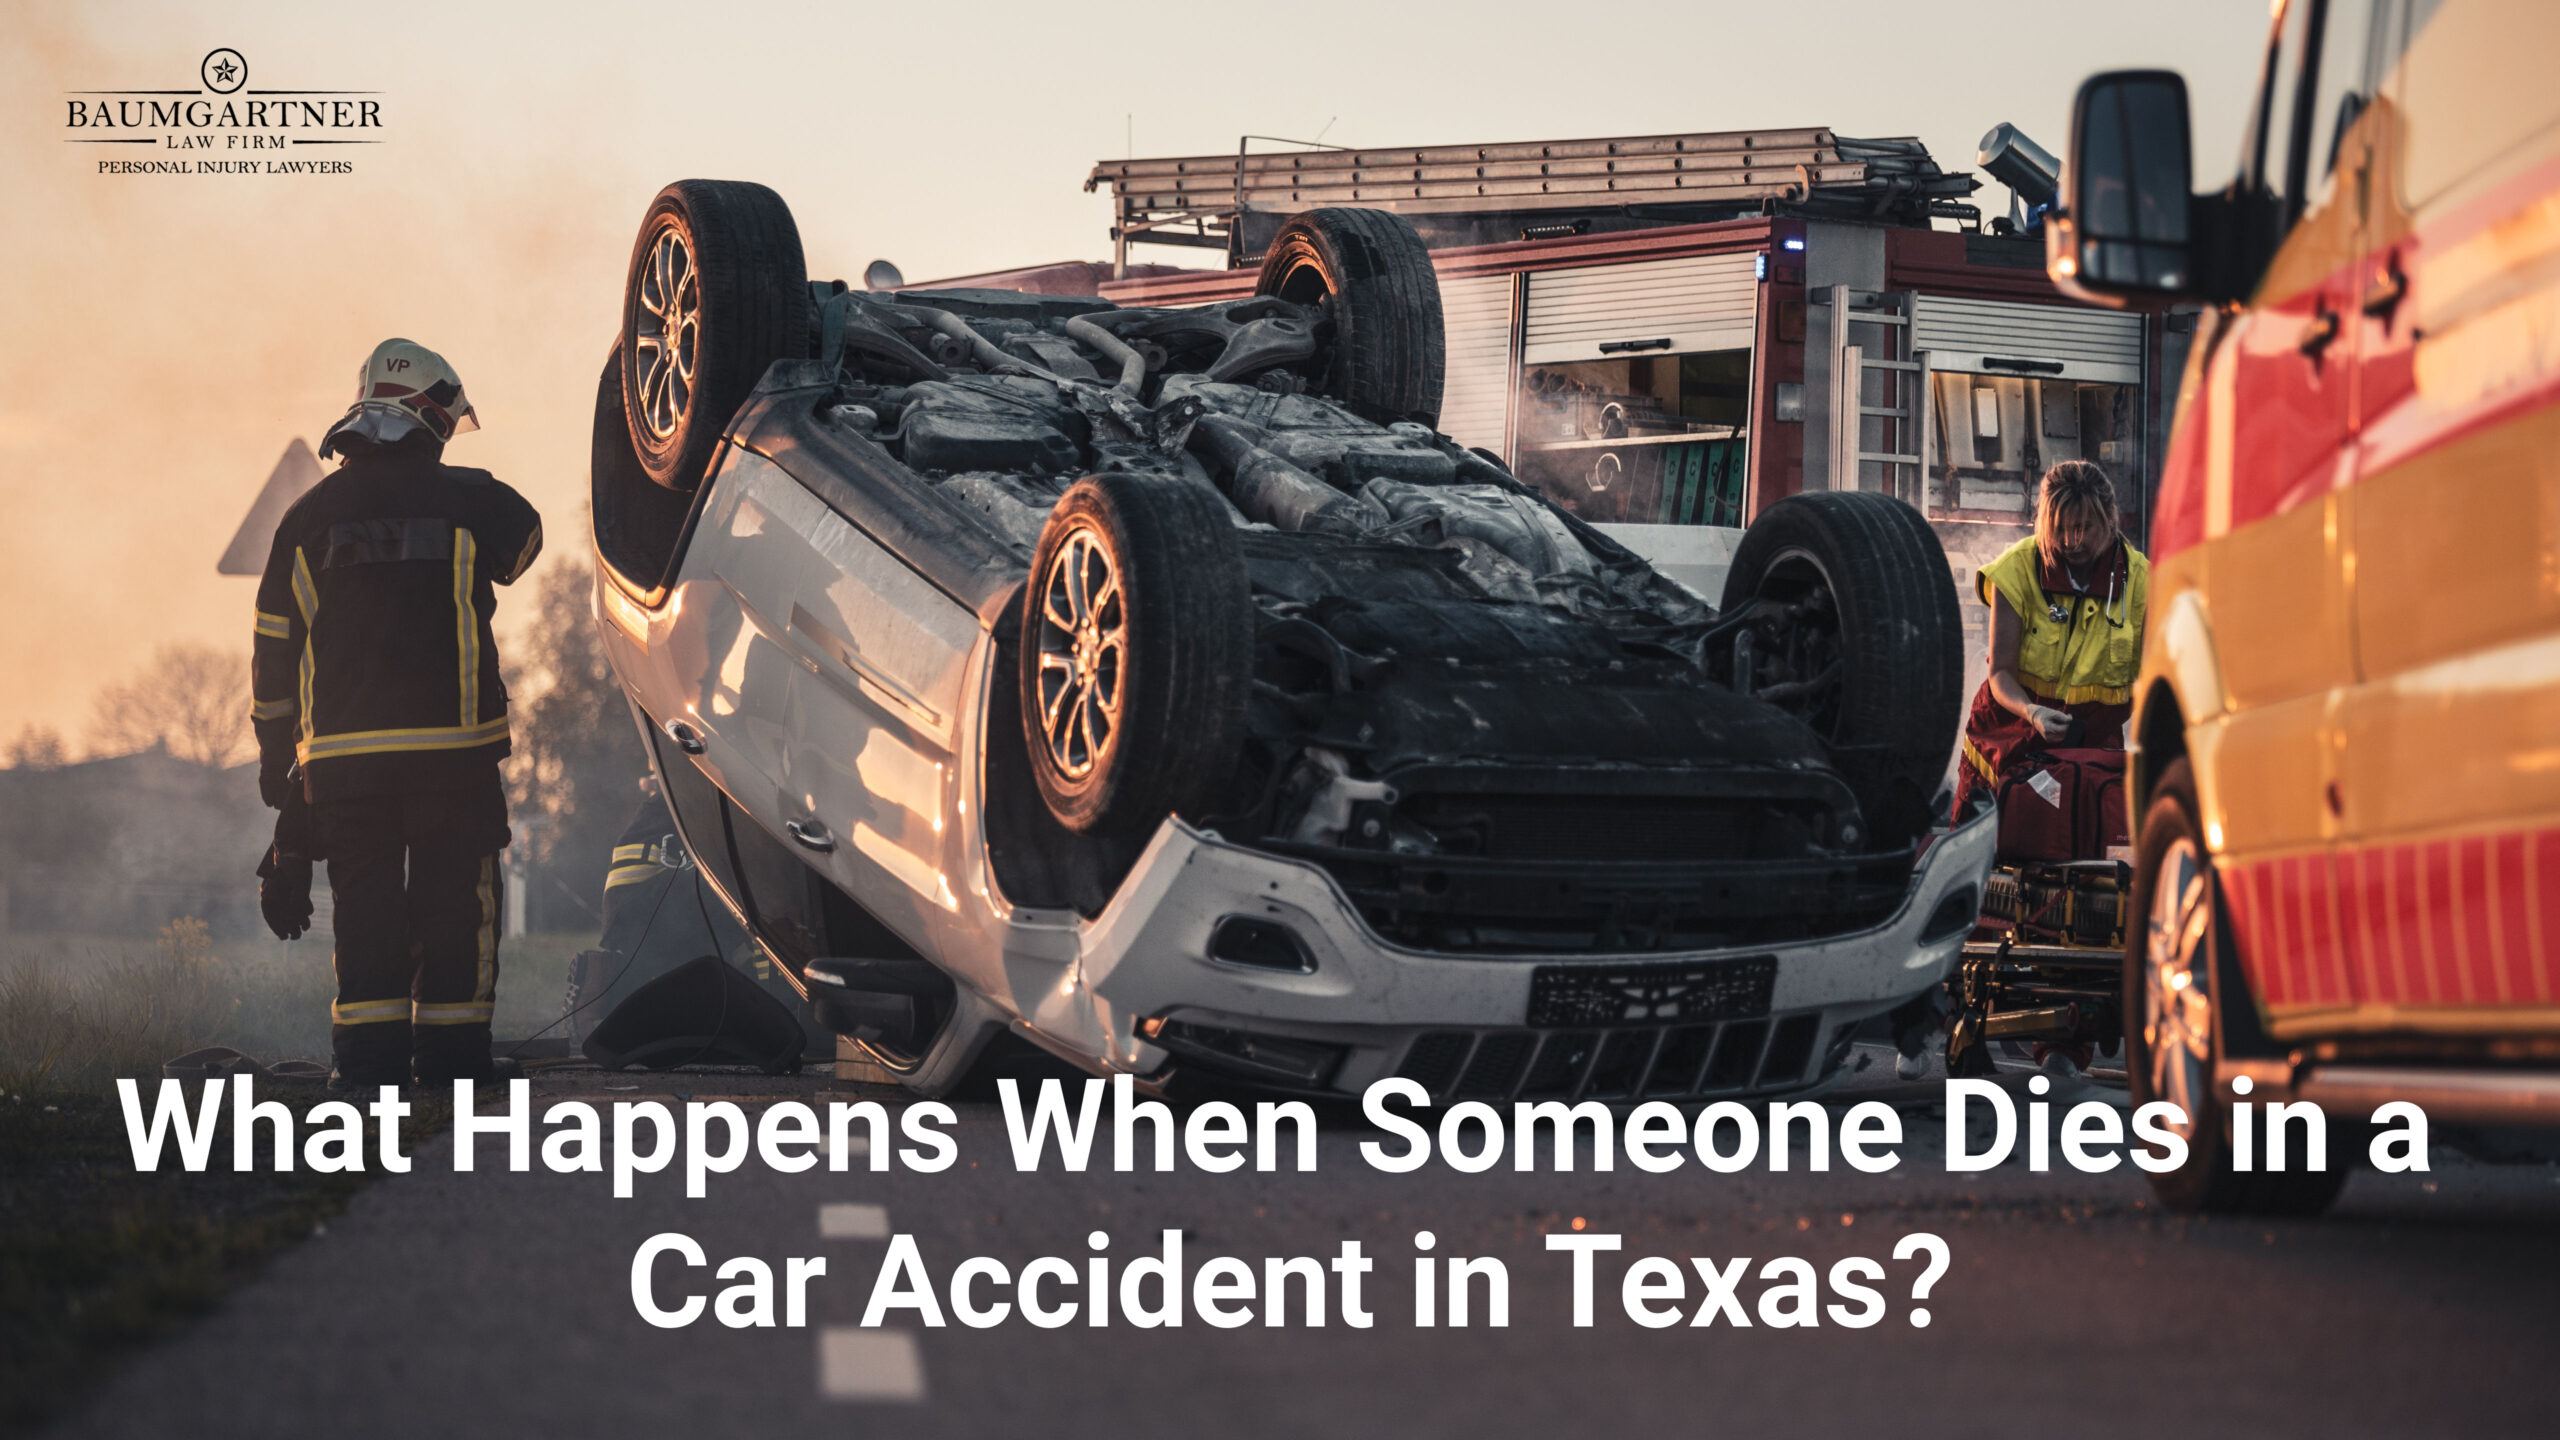 Fatal car accident in Texas